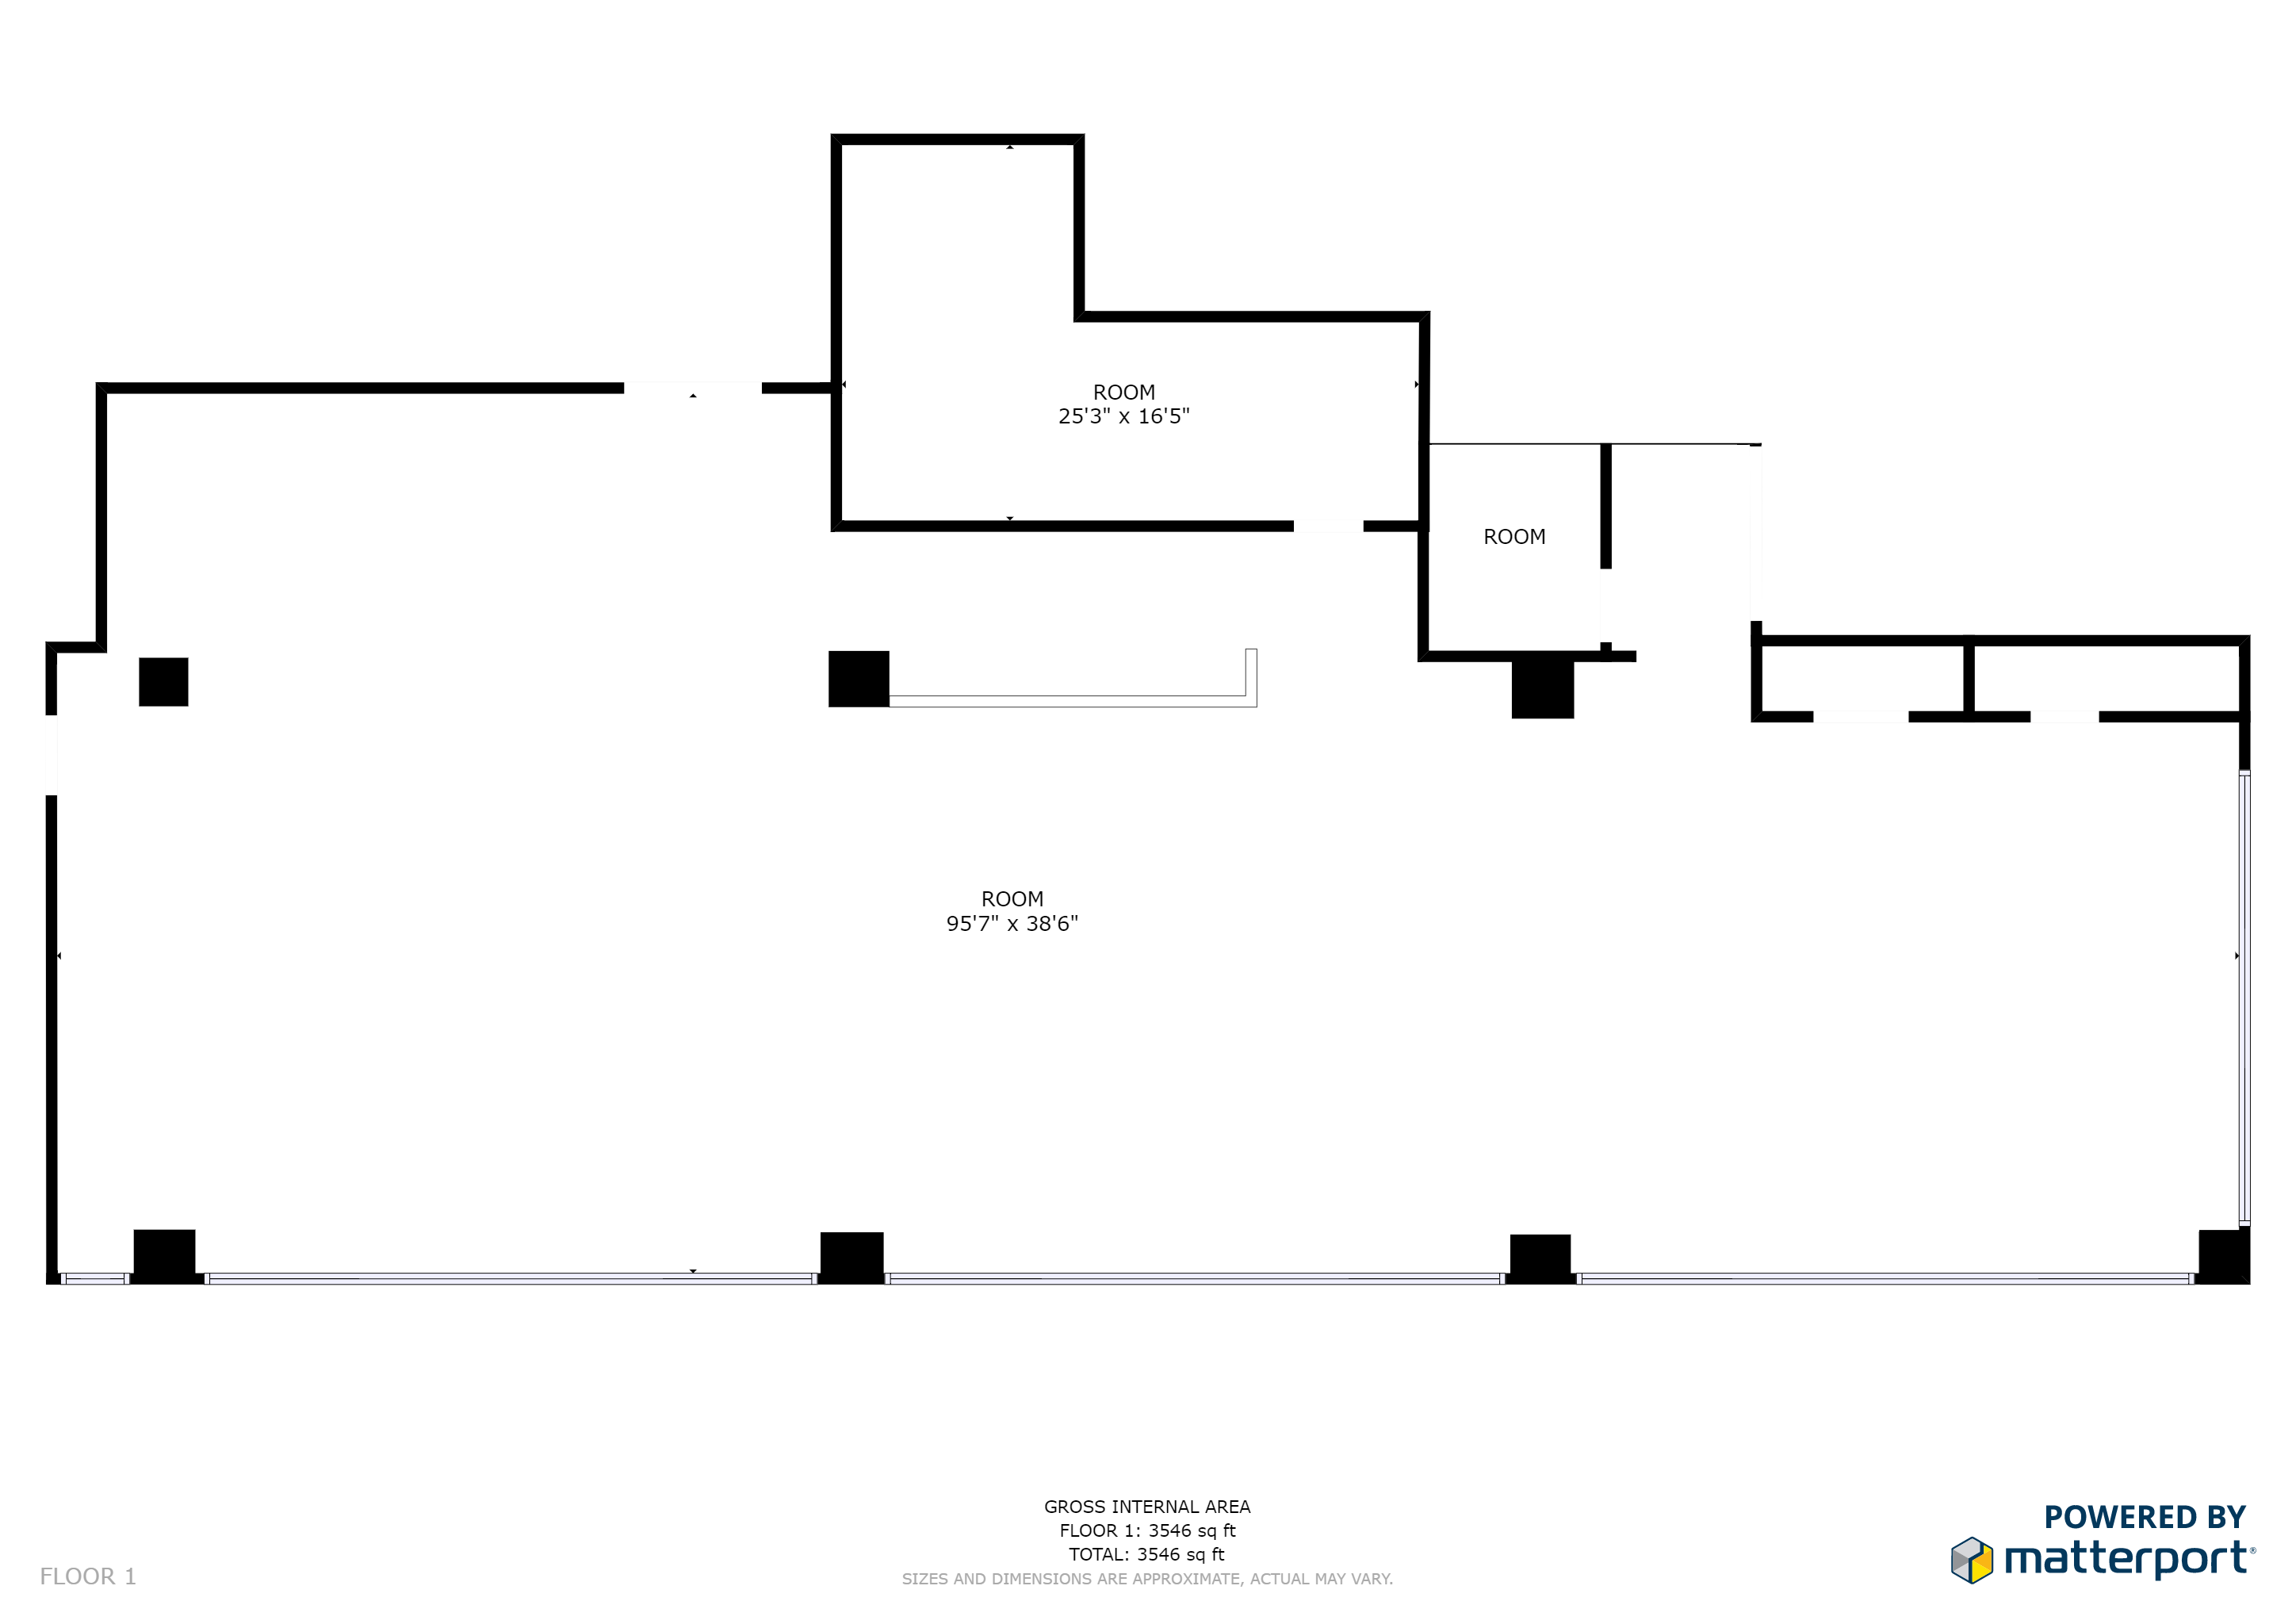 A floor plan of the ground level of a house.